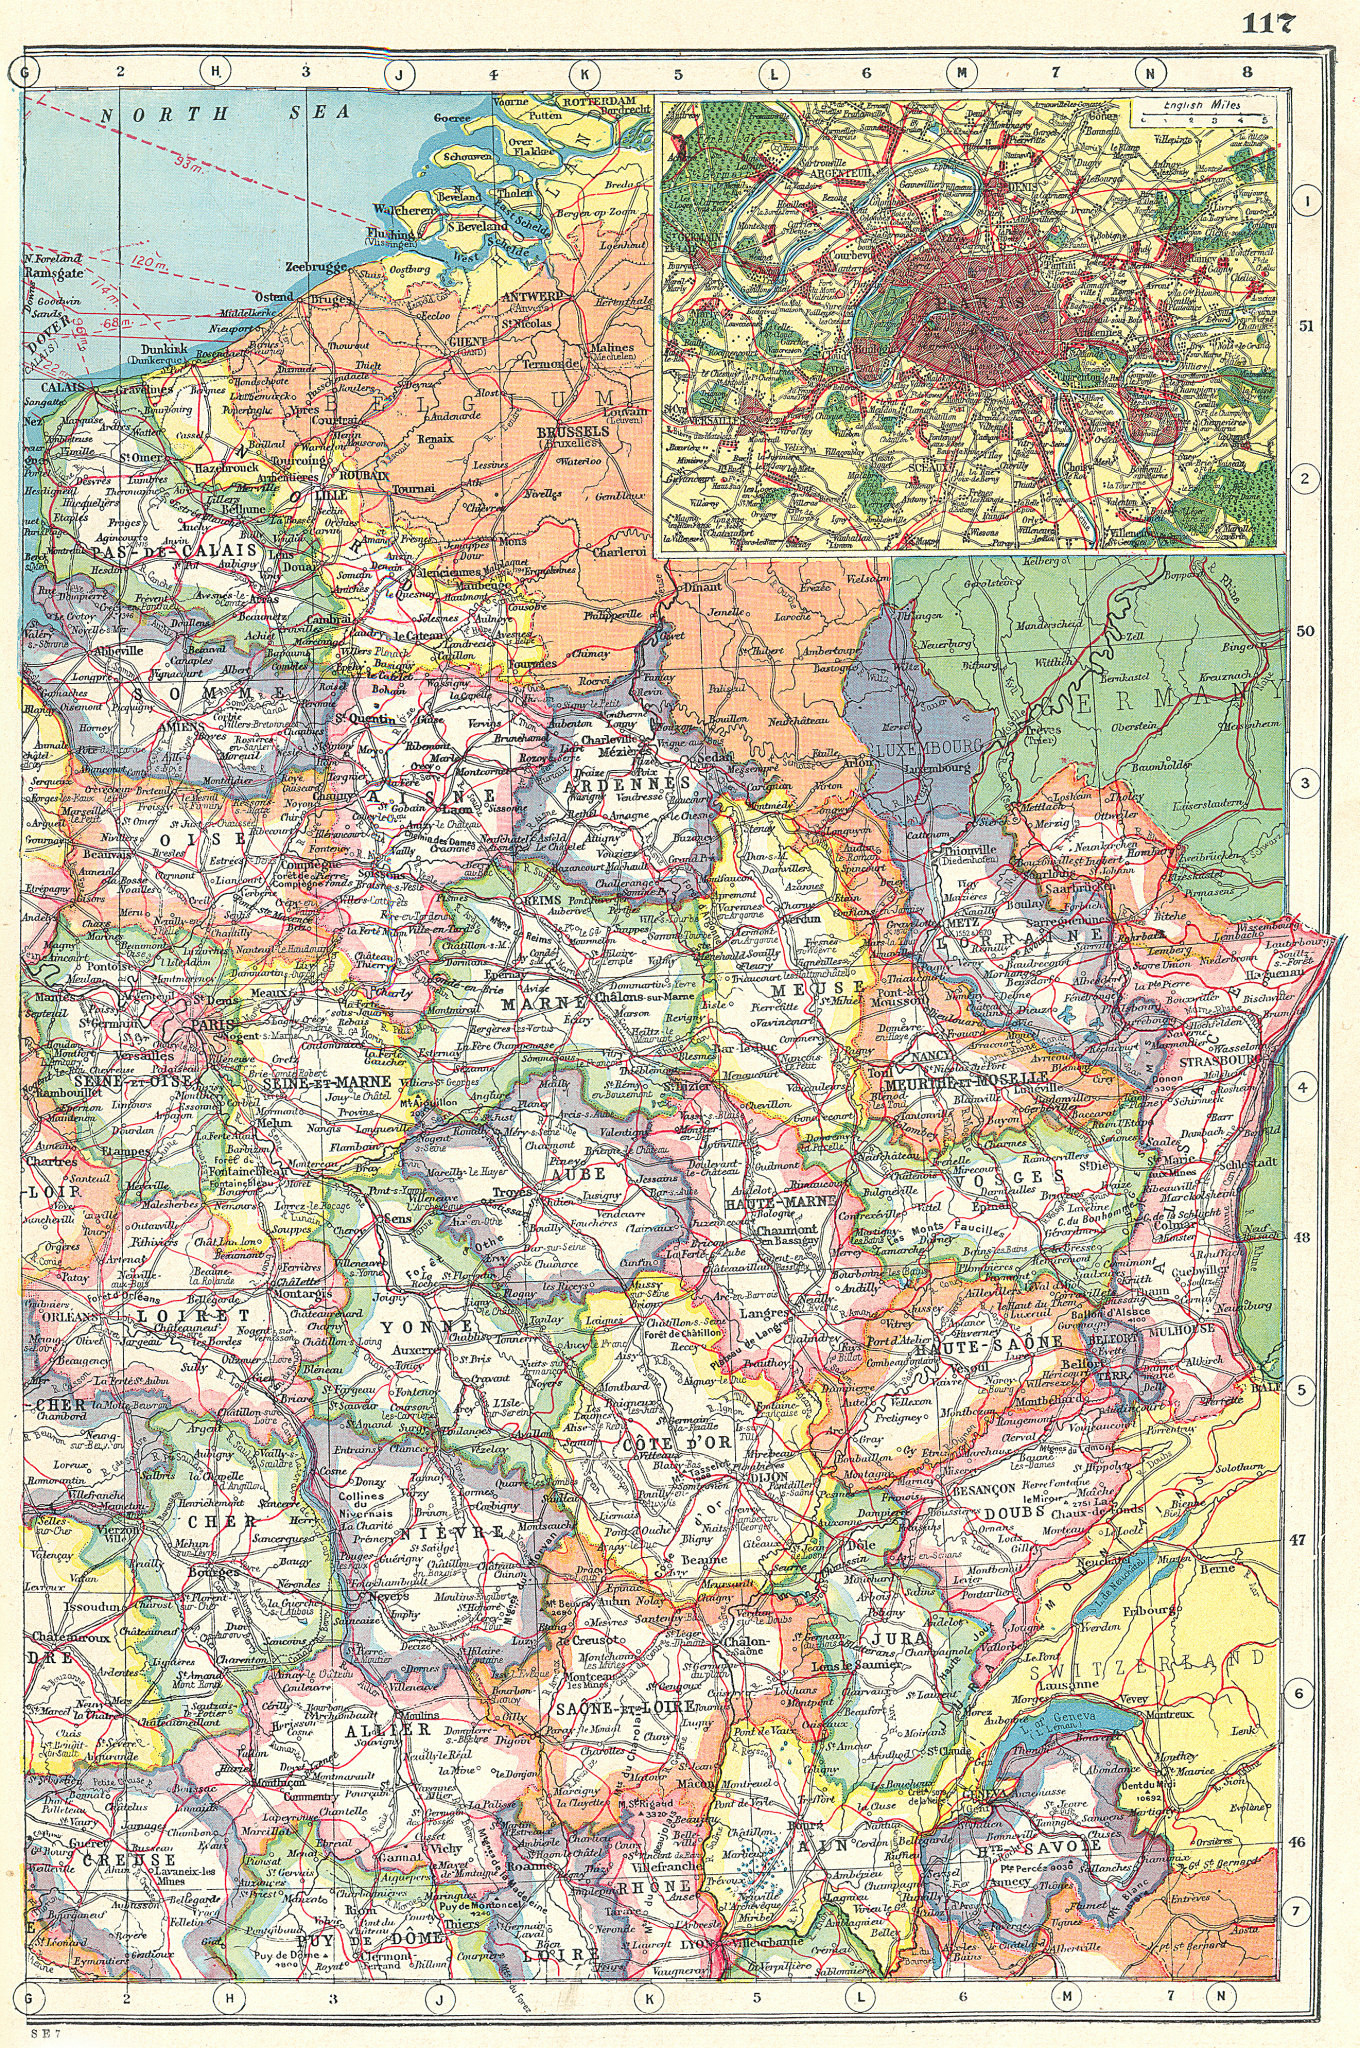 Associate Product FRANCE NORTH EAST. Showing departements. Inset Paris & environs 1920 old map